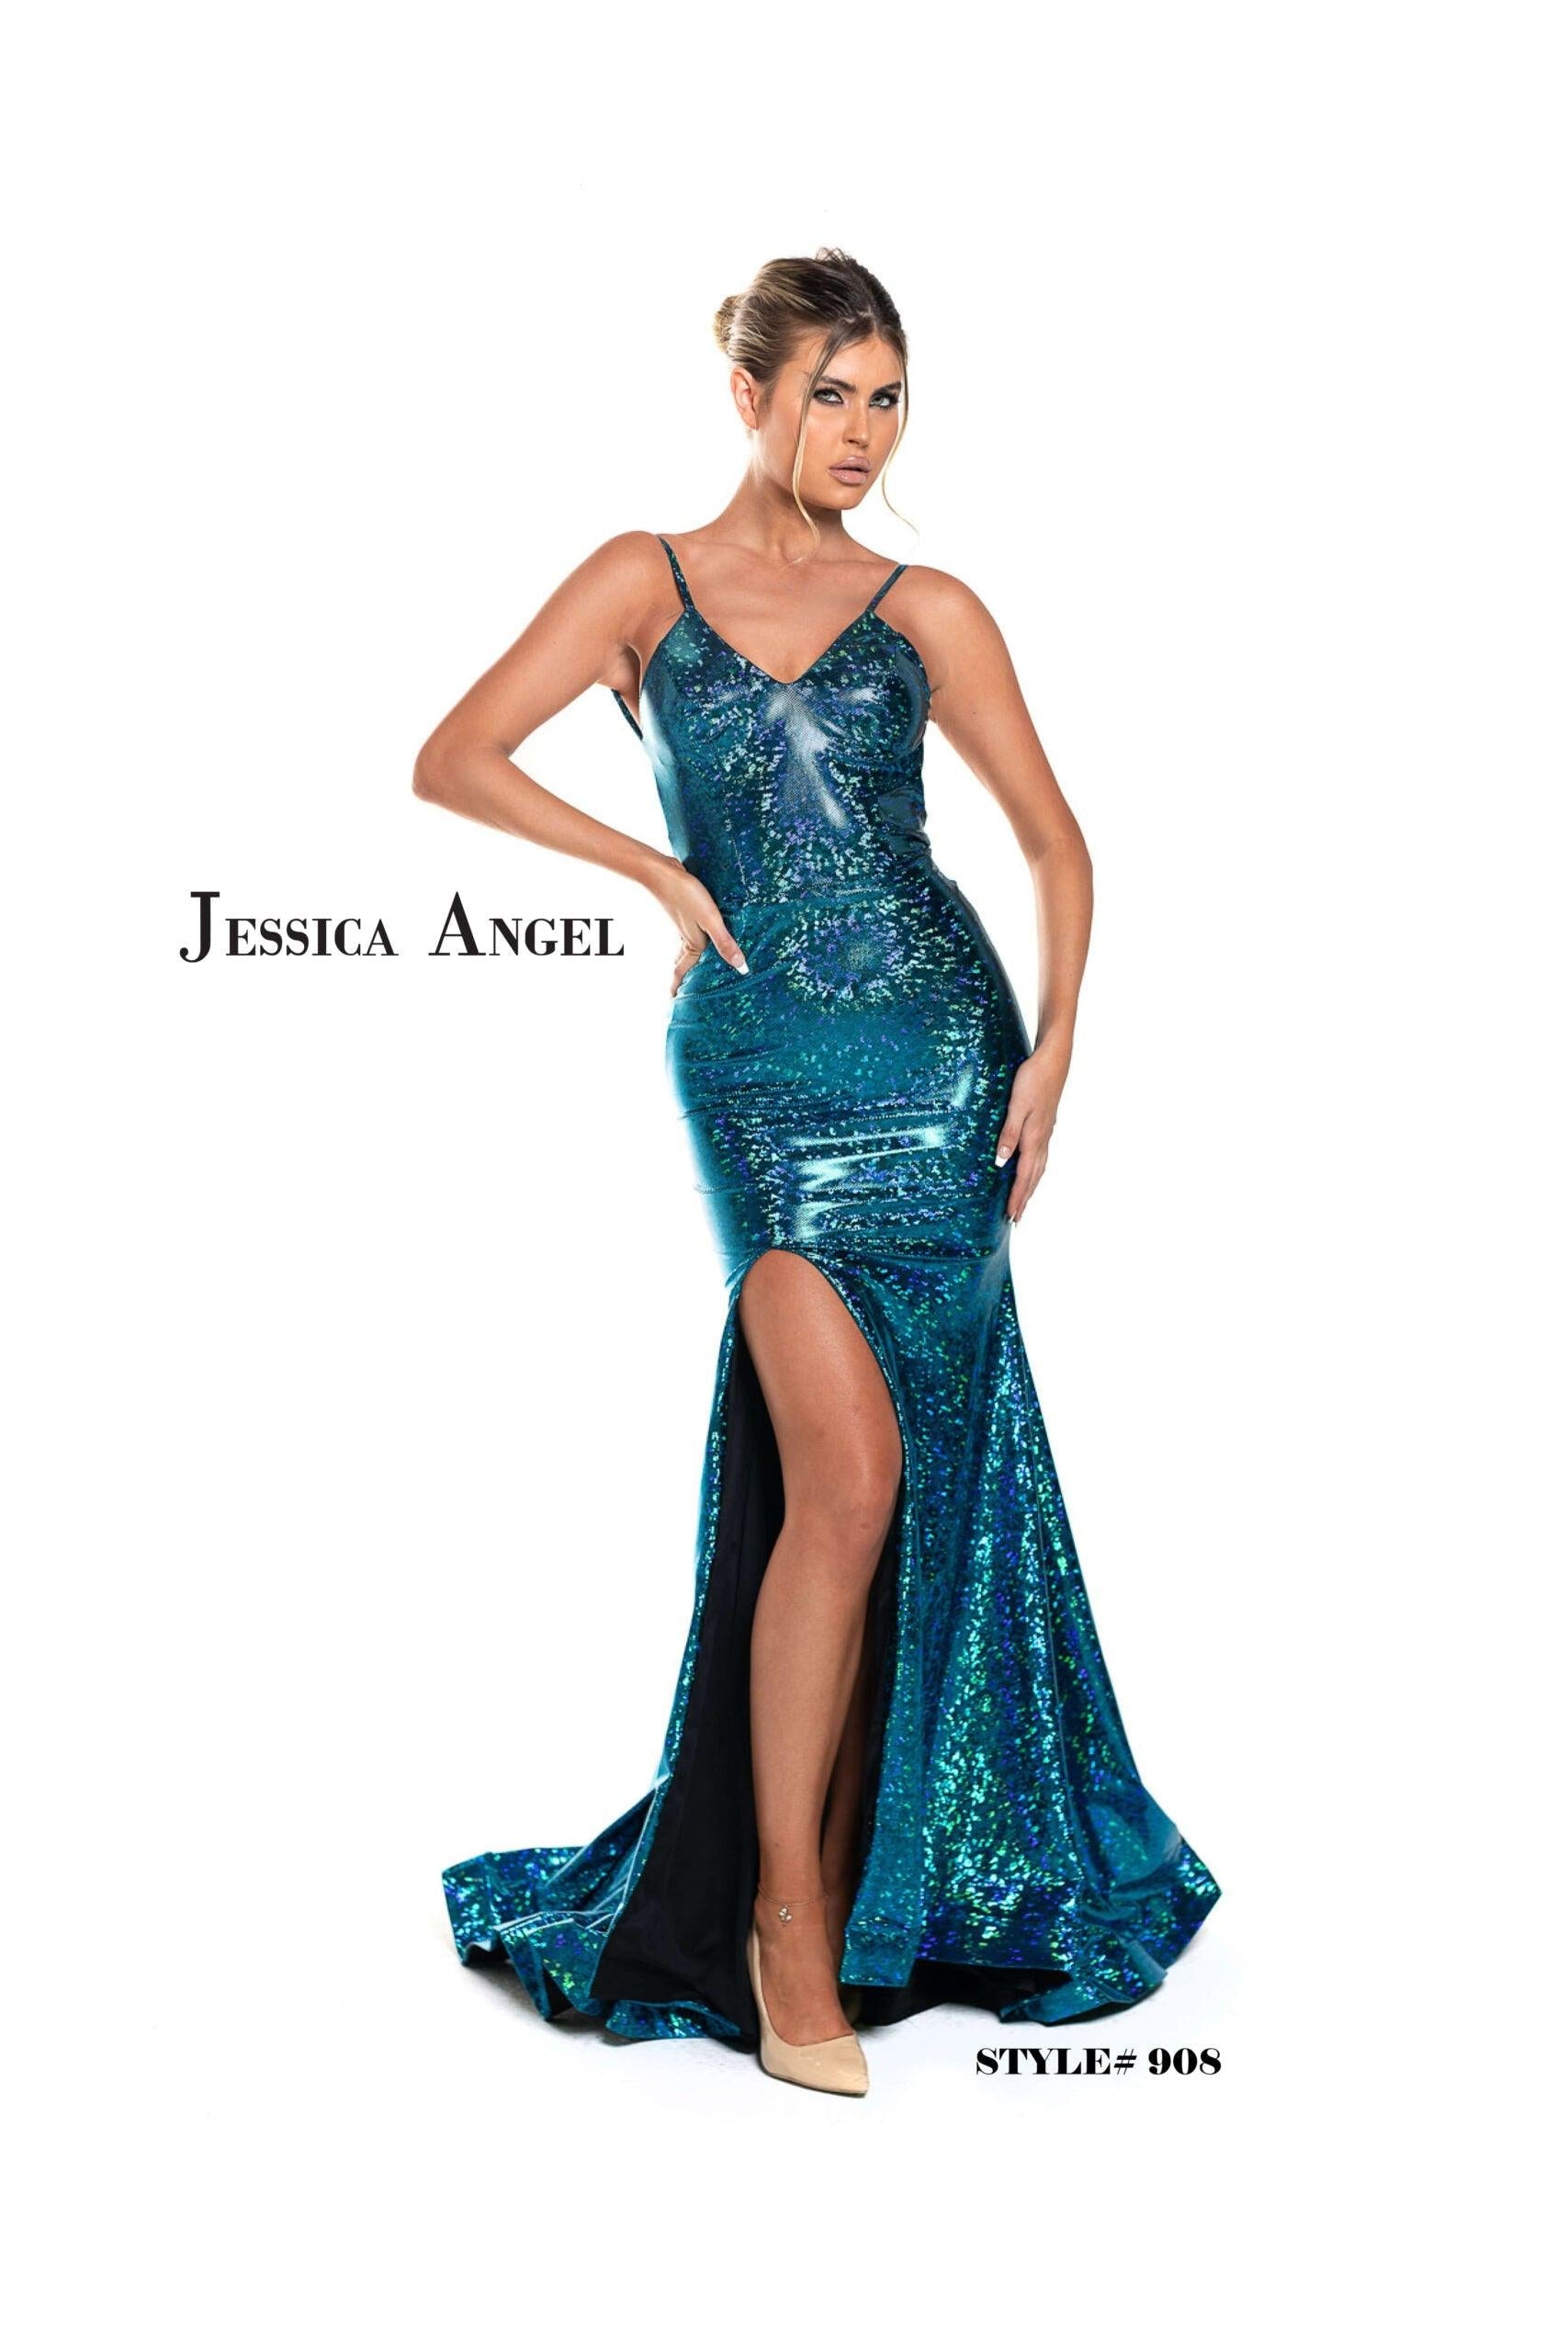 Jessica Angel Spaghetti Strap Fitted Long Dress 908 - The Dress Outlet